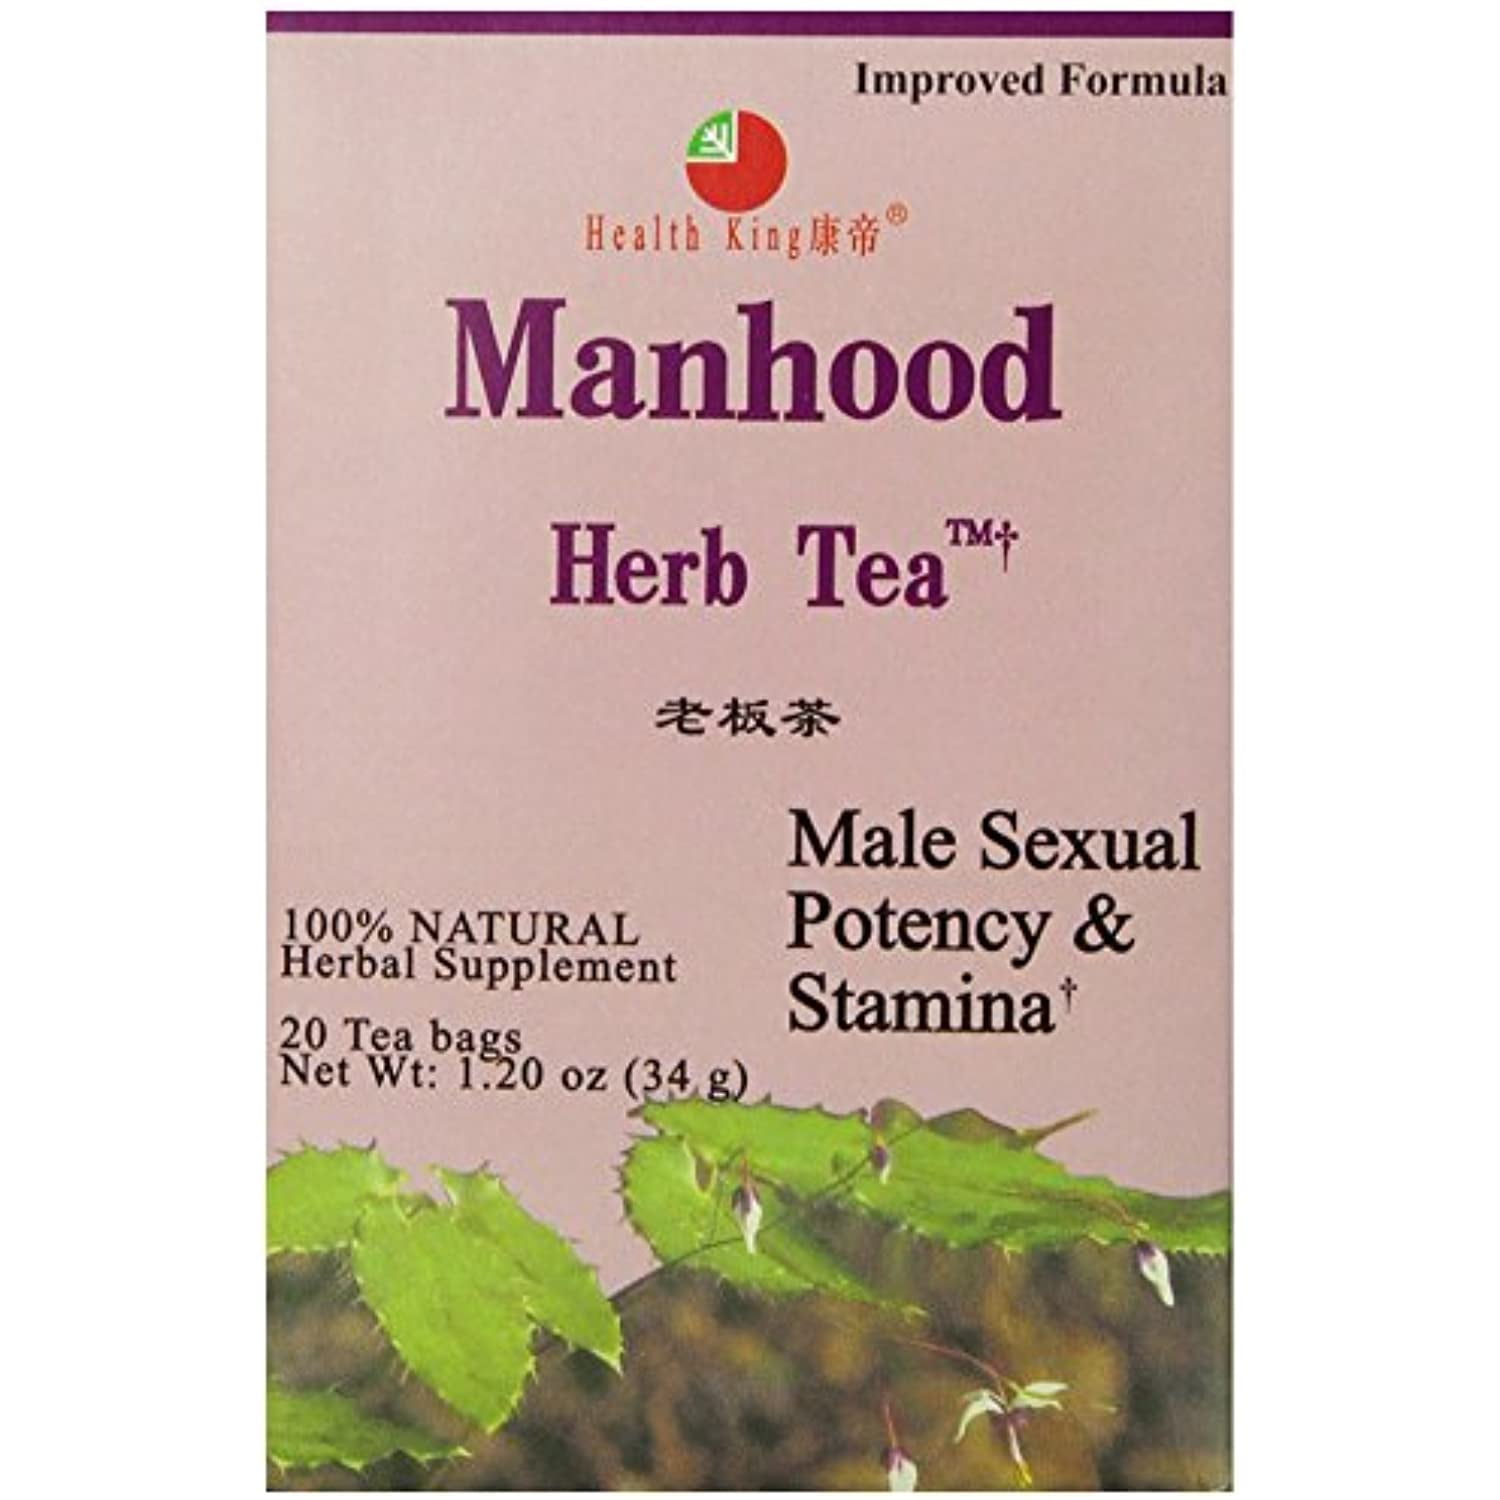 Health King Manhood Herb Tea, Teabags, 20 Count picture